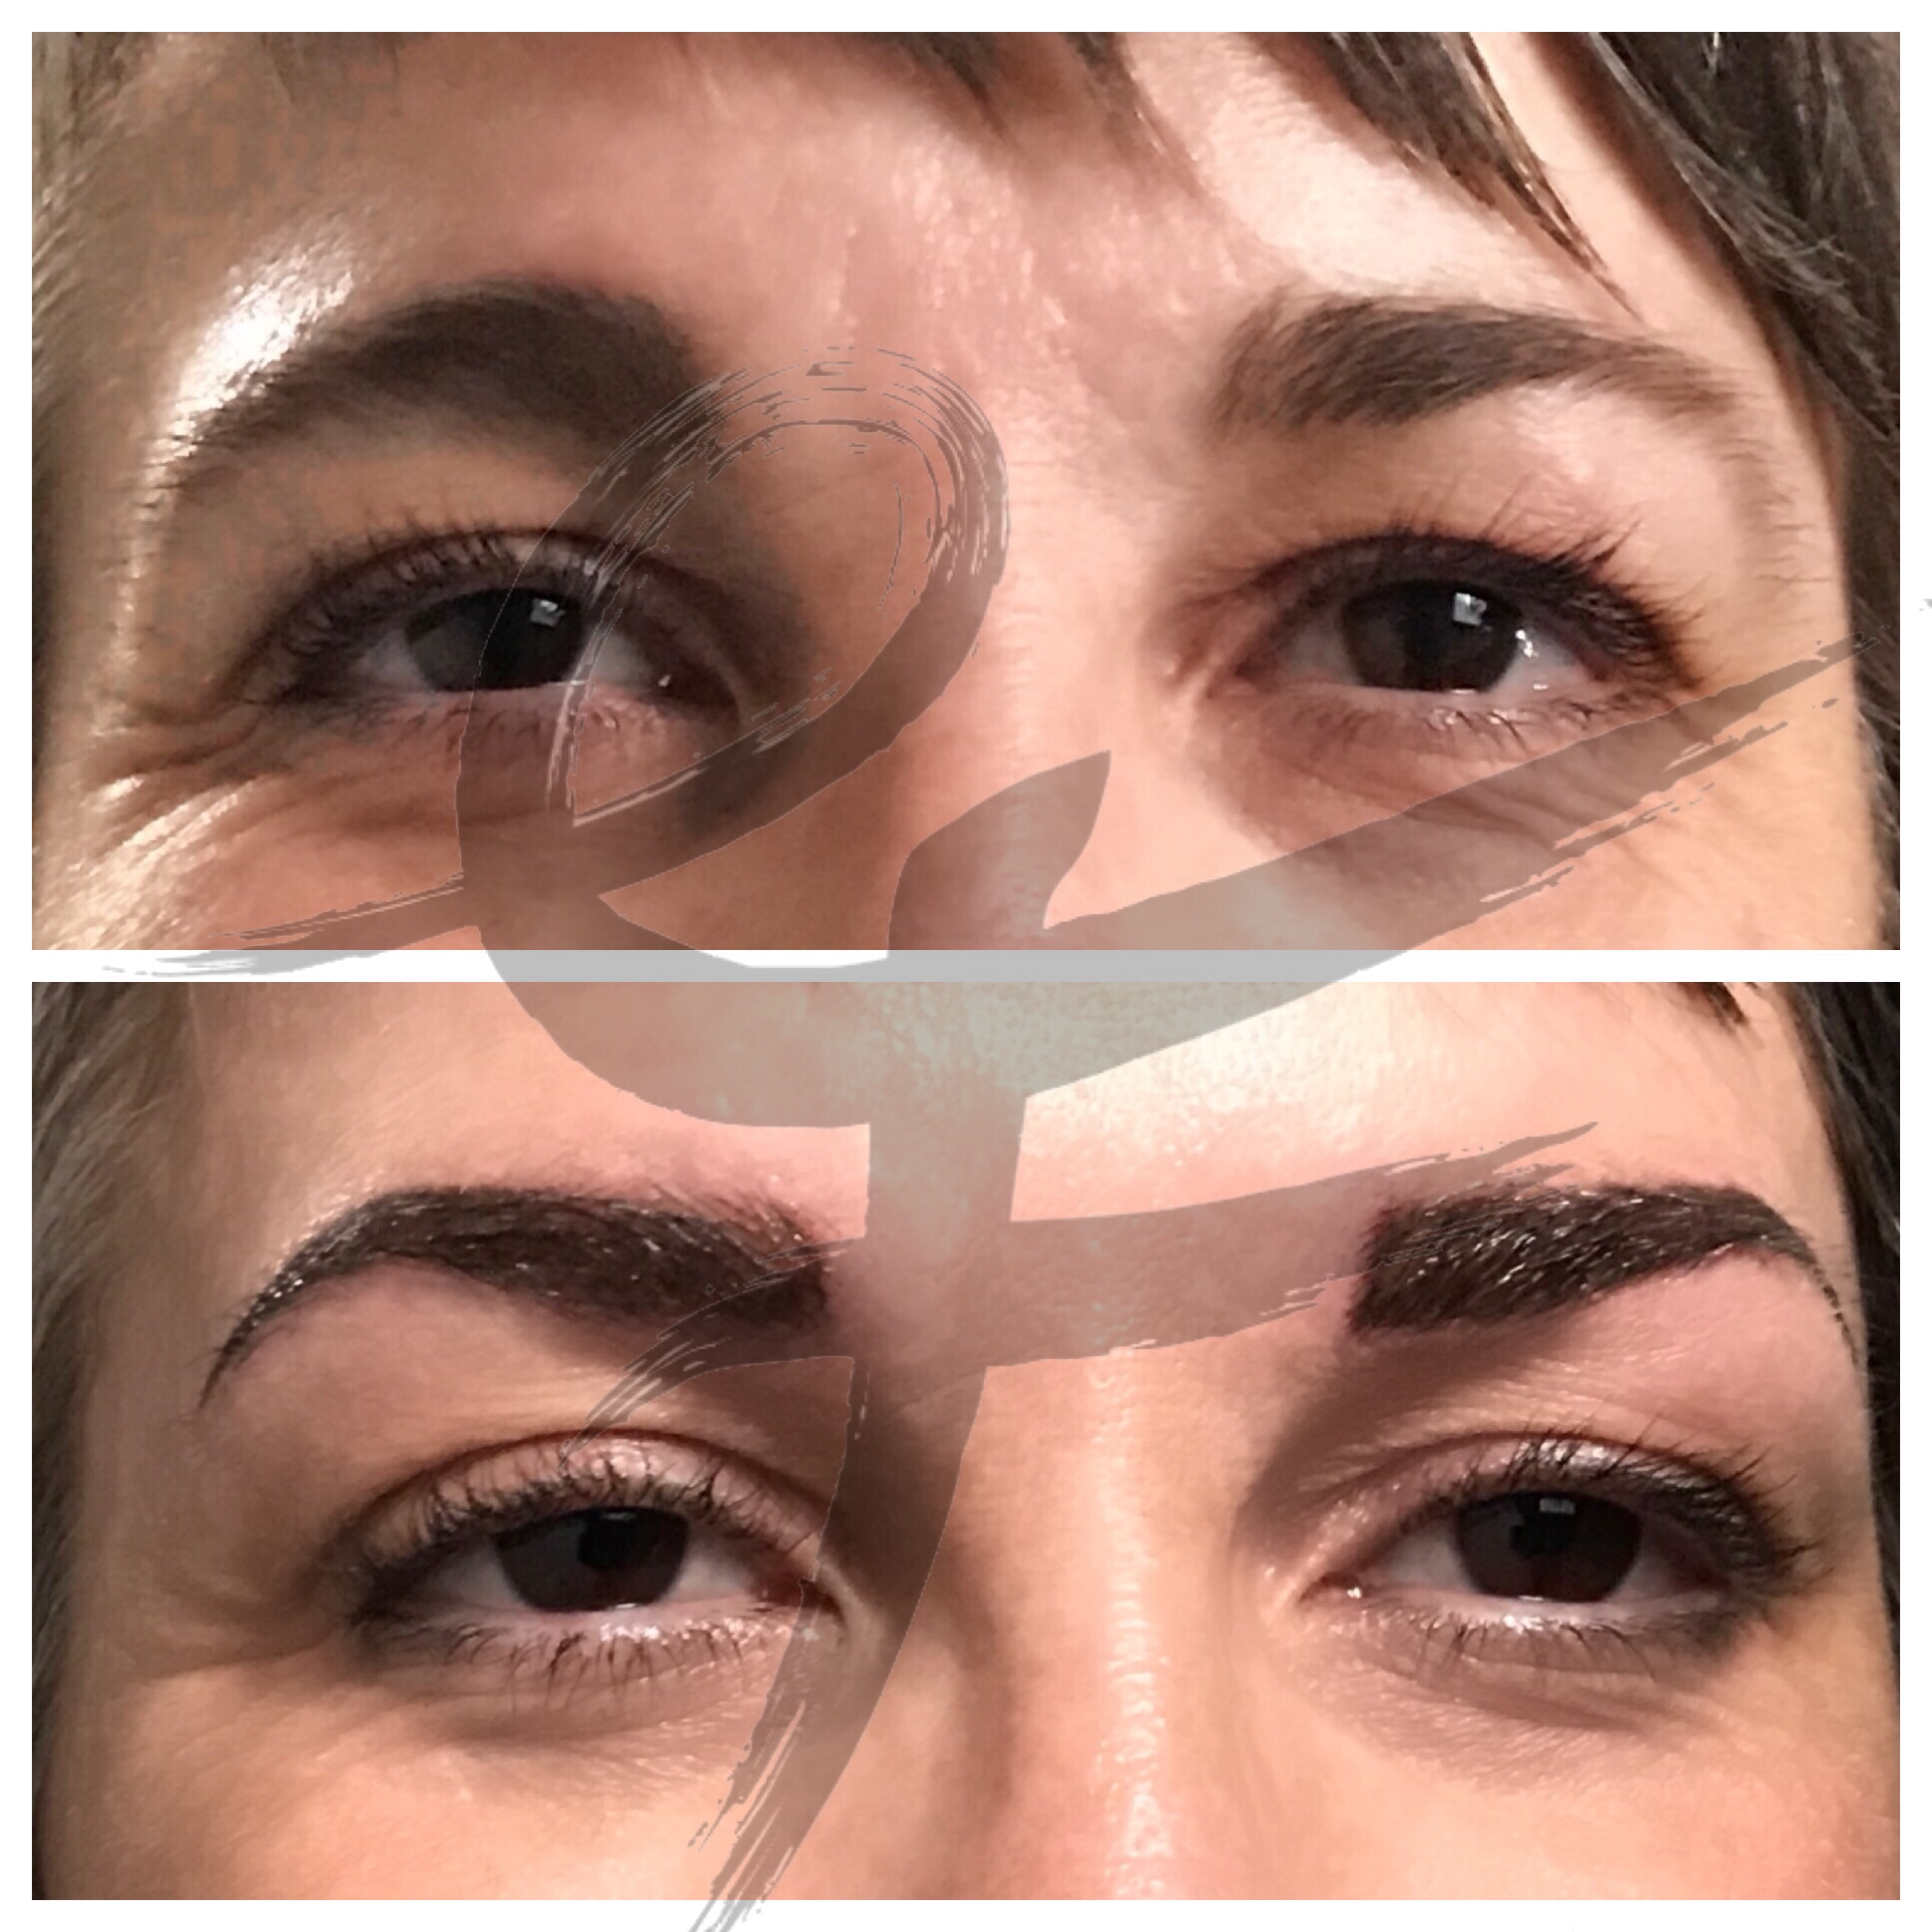 Corrected asymmetrical brows with drooping tails to give a more balanced and youthful appearance.